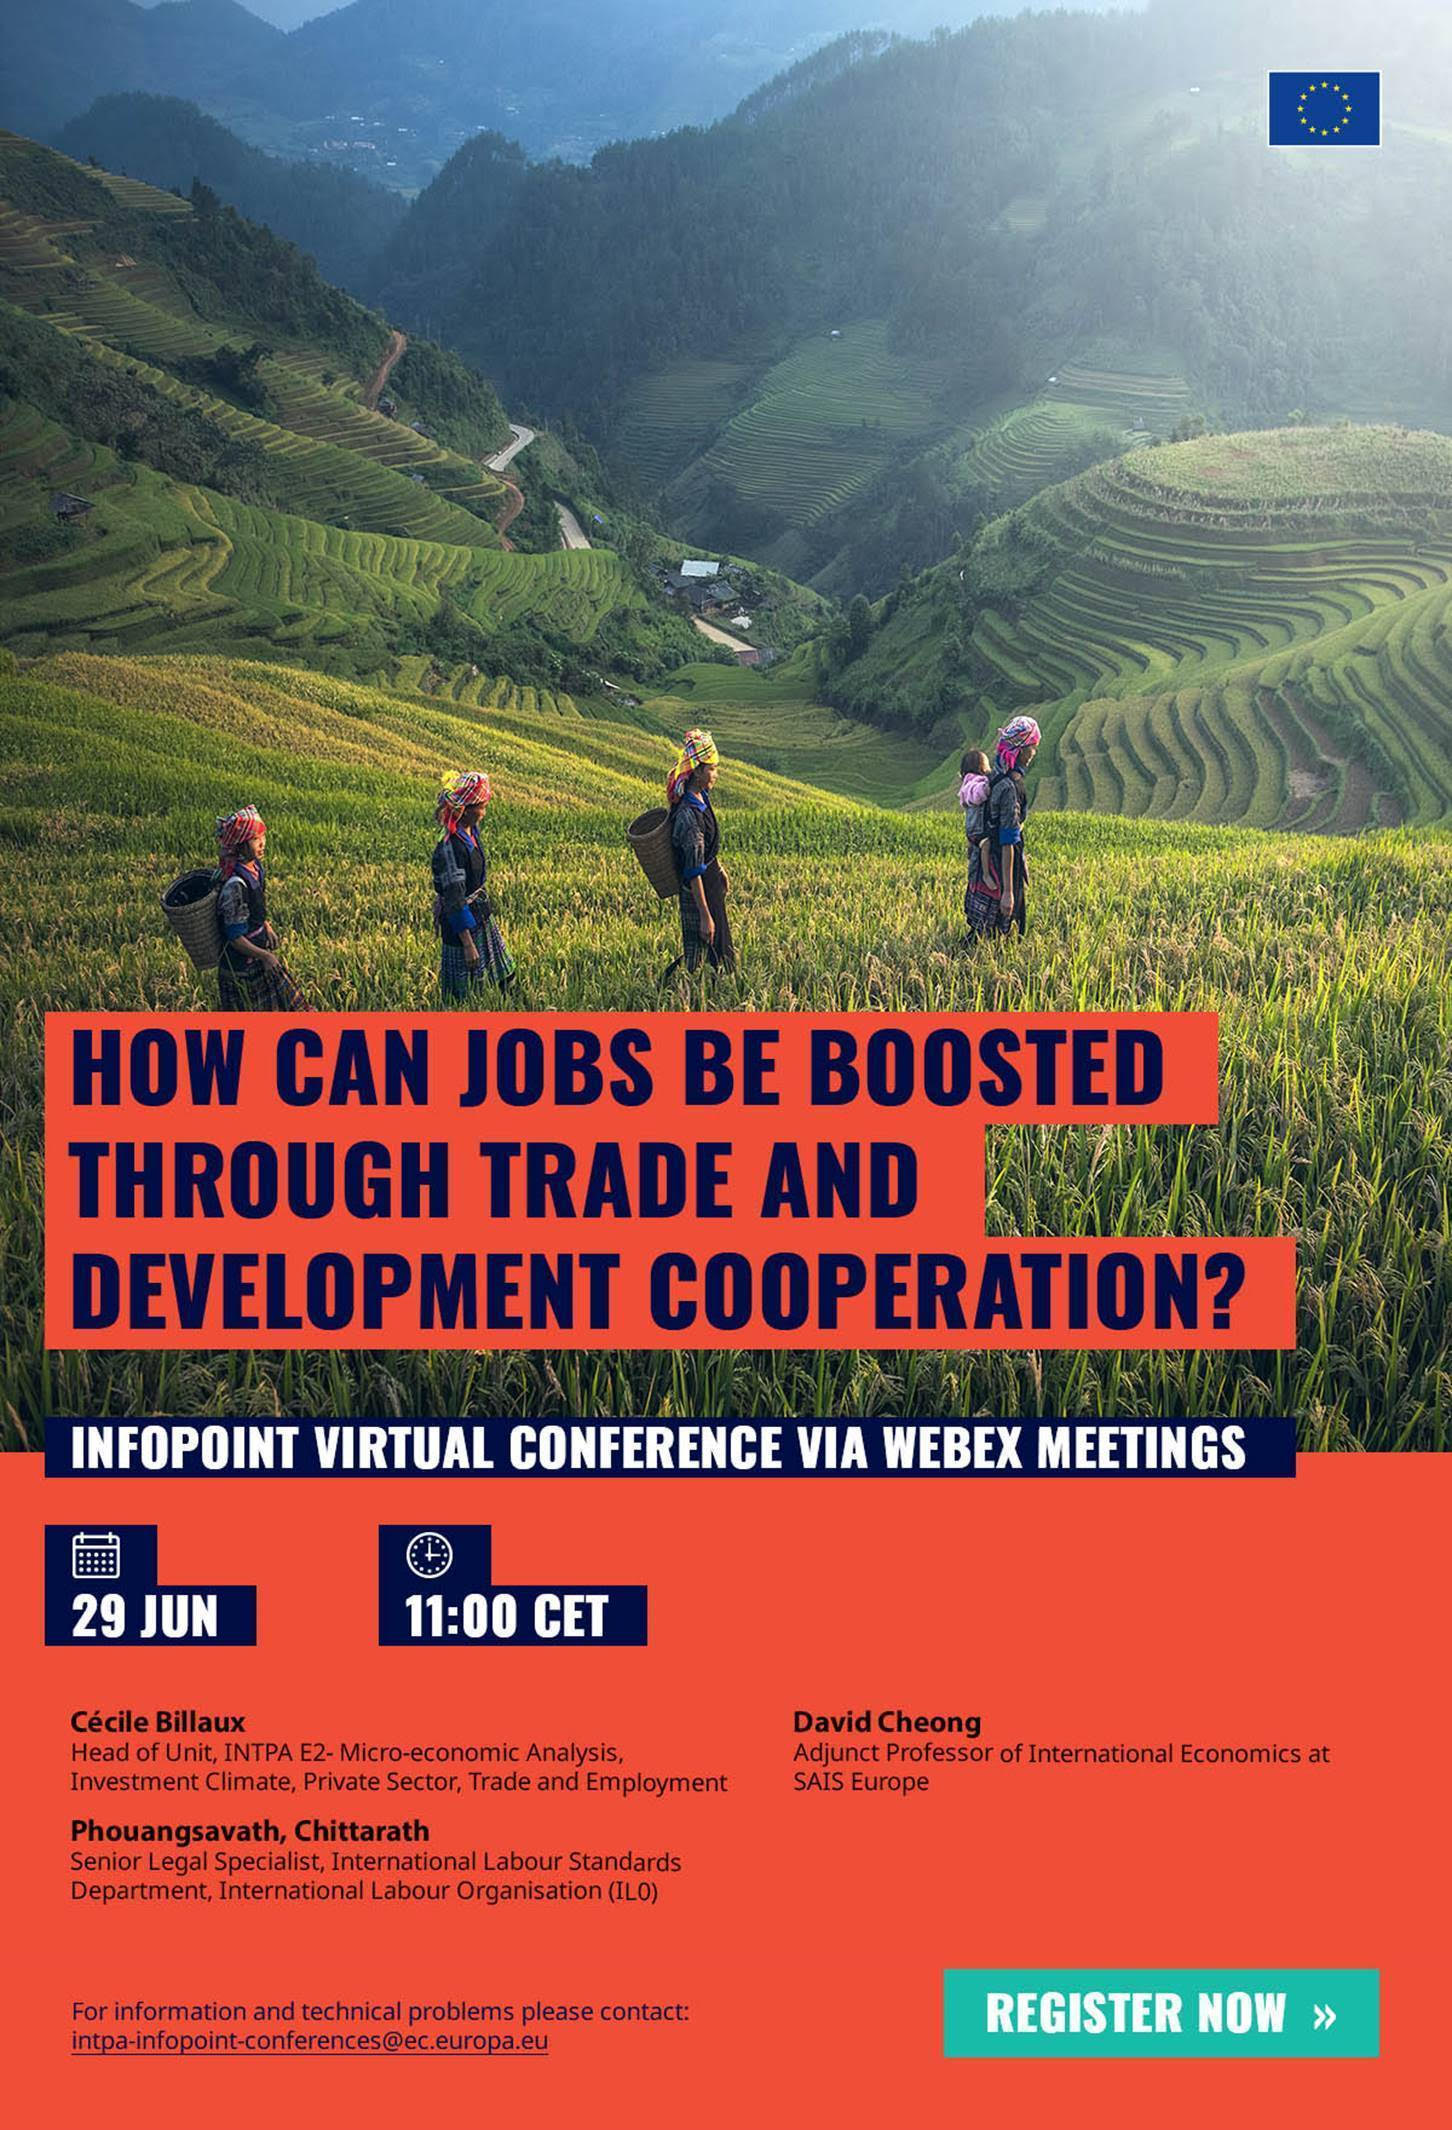 EU: How can jobs be boosted through Trade and Development Cooperation?